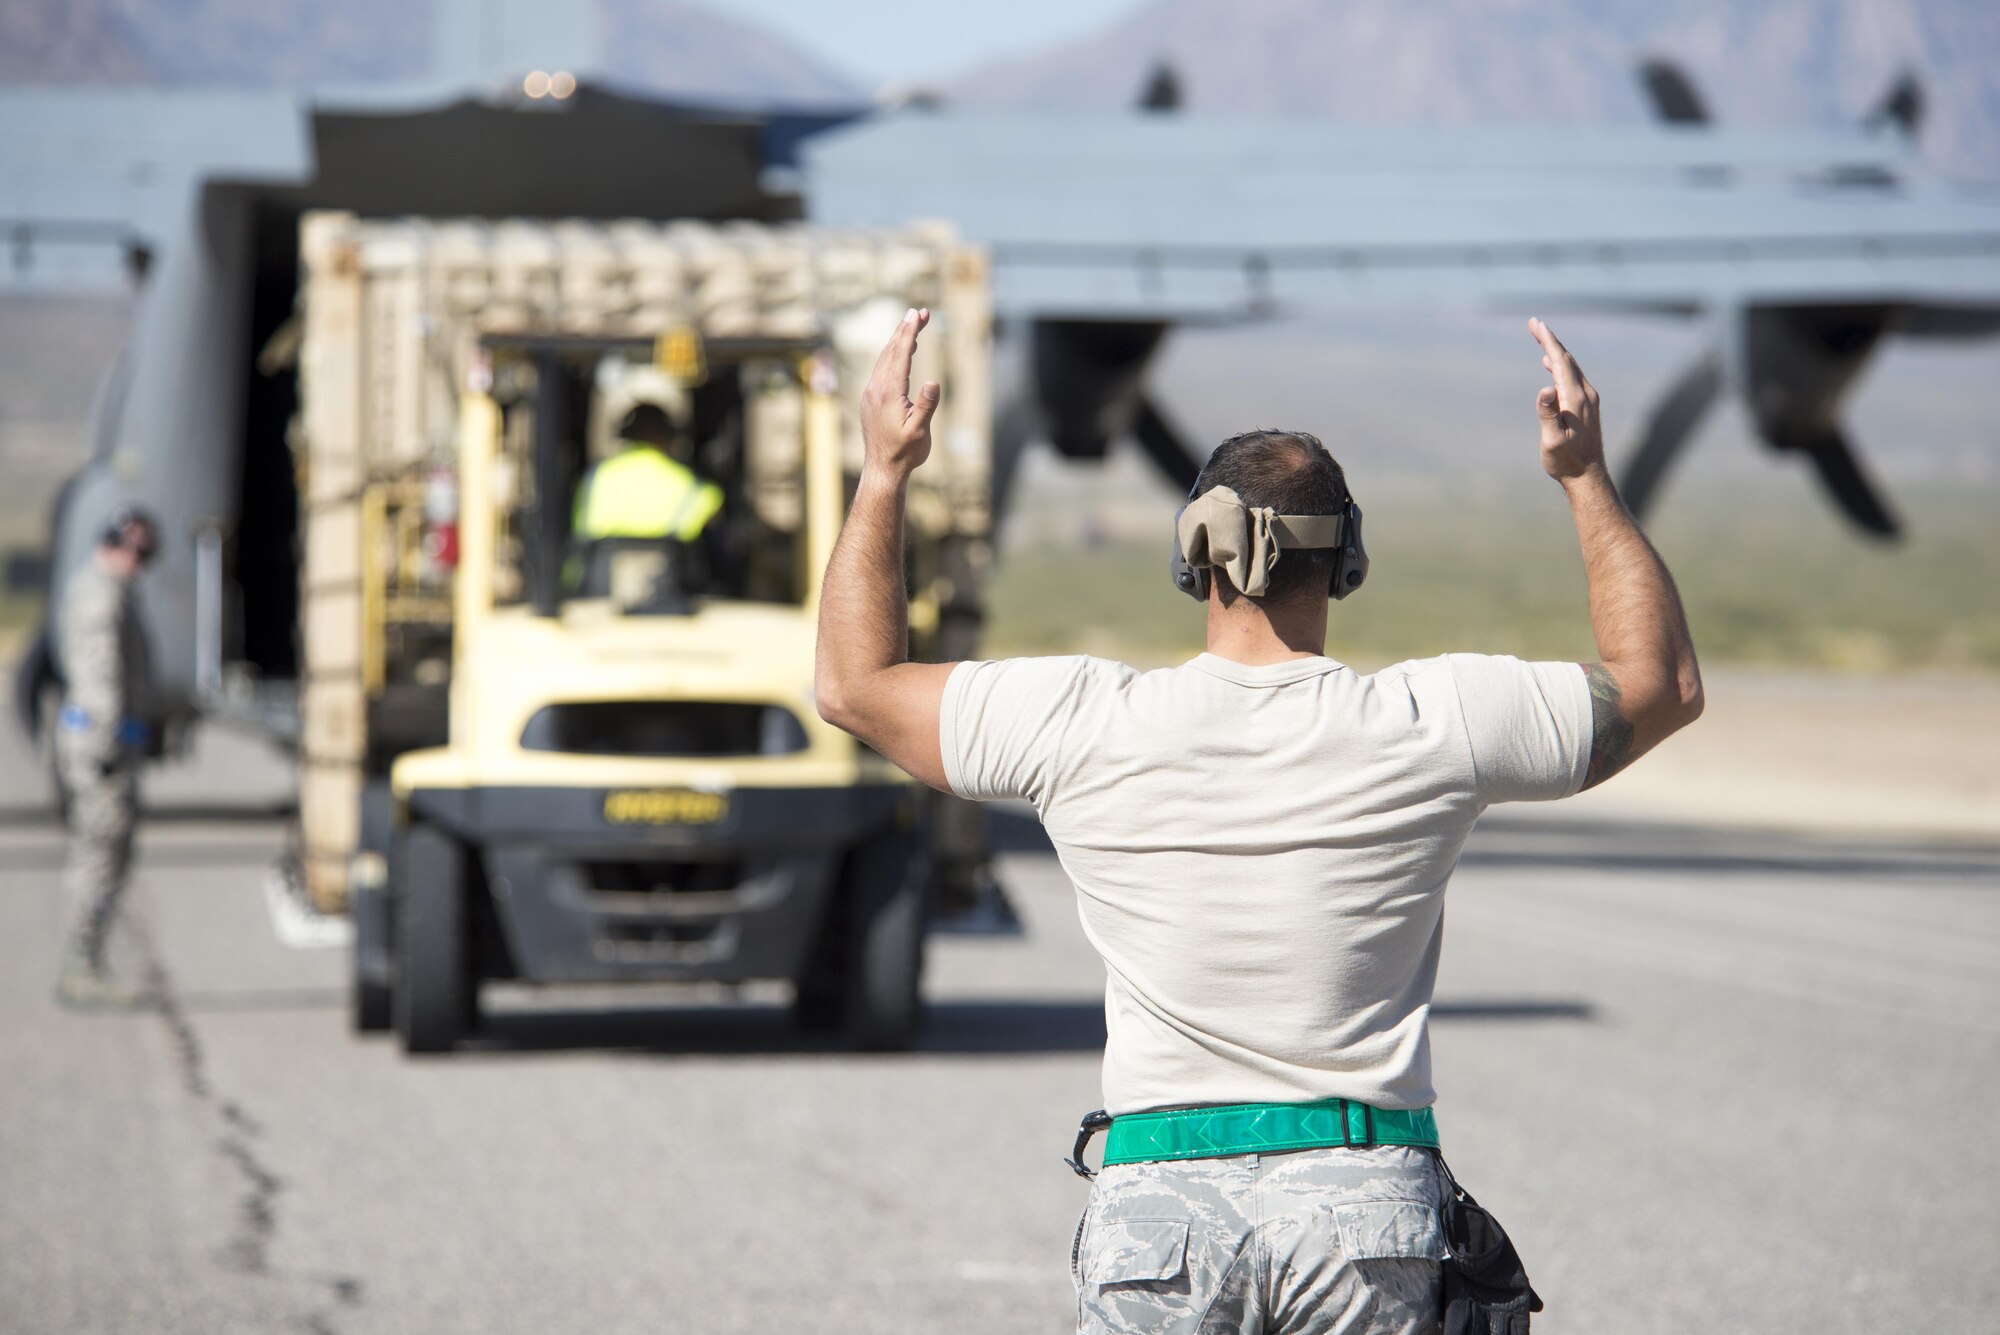 Airmen from the 49th Logistics Readiness Squadron Small Air Terminal offload equipment from a C-130 Hercules at White Sands Missile Range, N.M., in support of Vigilant Shield 18 on Oct. 31, 2017. Airmen worked with WSMR civilian logistics personnel to offload the equipment at the limited service airfield.  (U.S. Air Force photo by Tech. Sgt. Jeff Howerton)